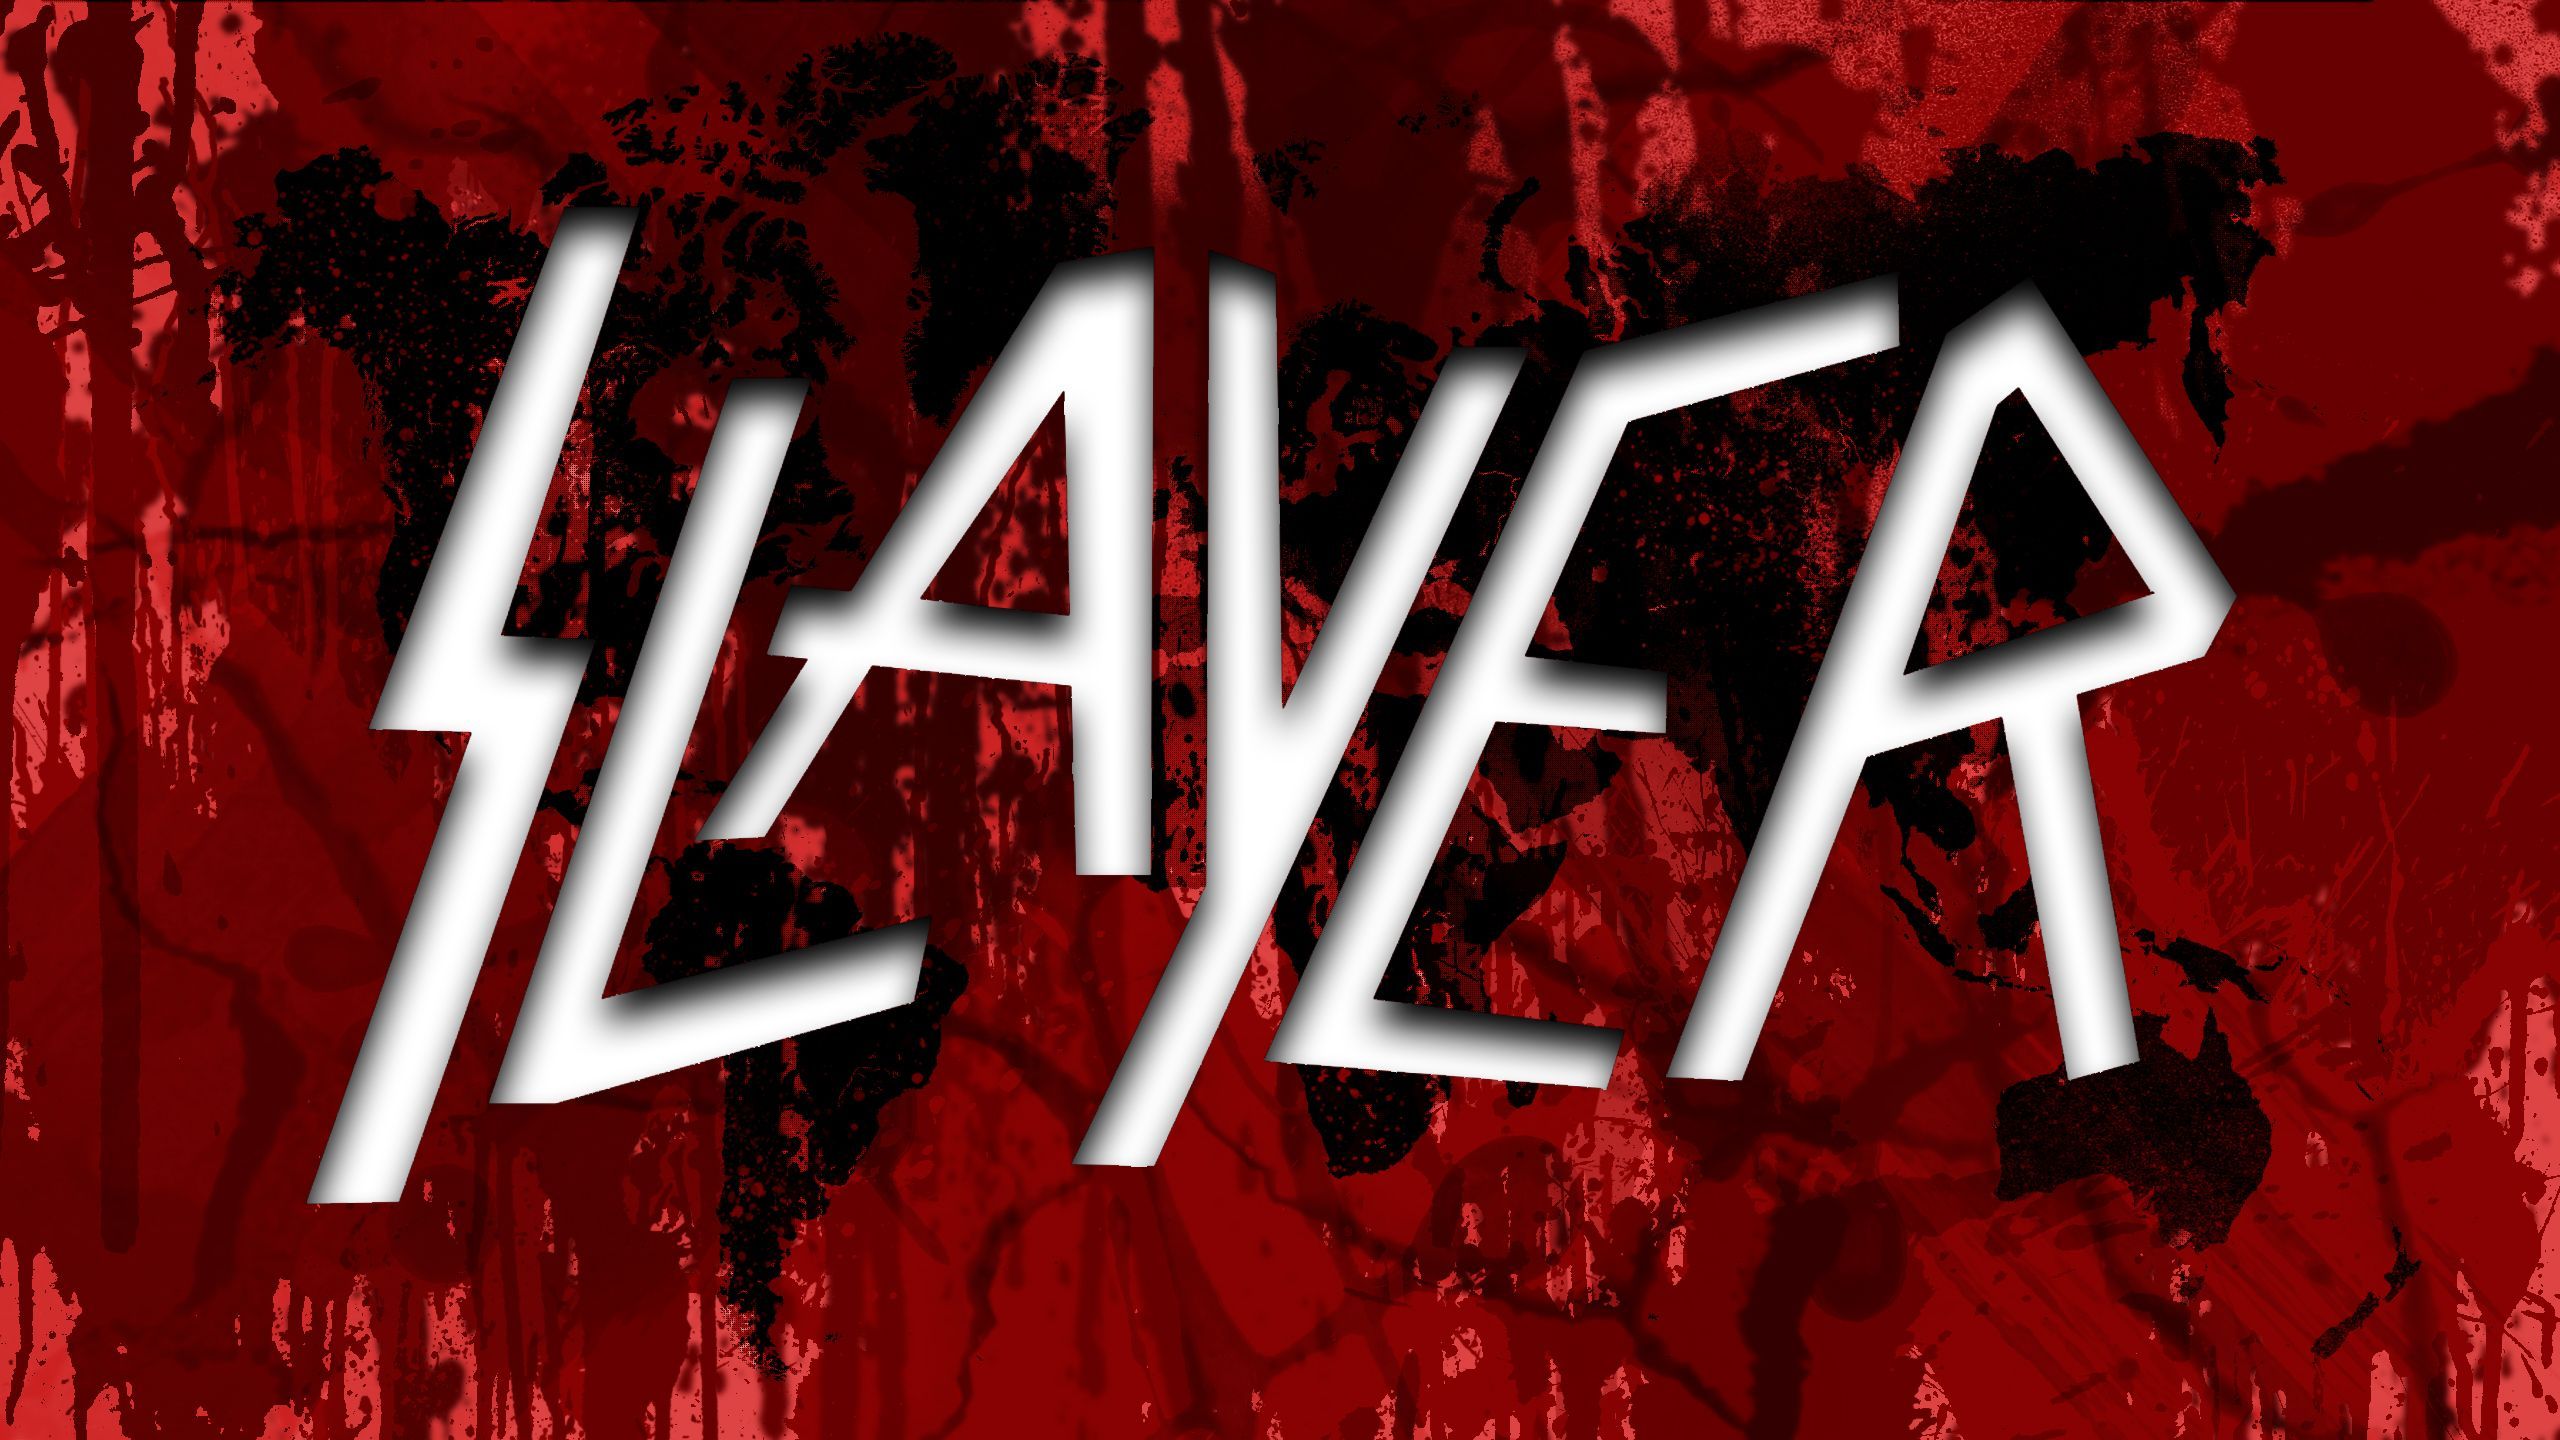 Free Download Slayer Band Wallpapers 2560x1440